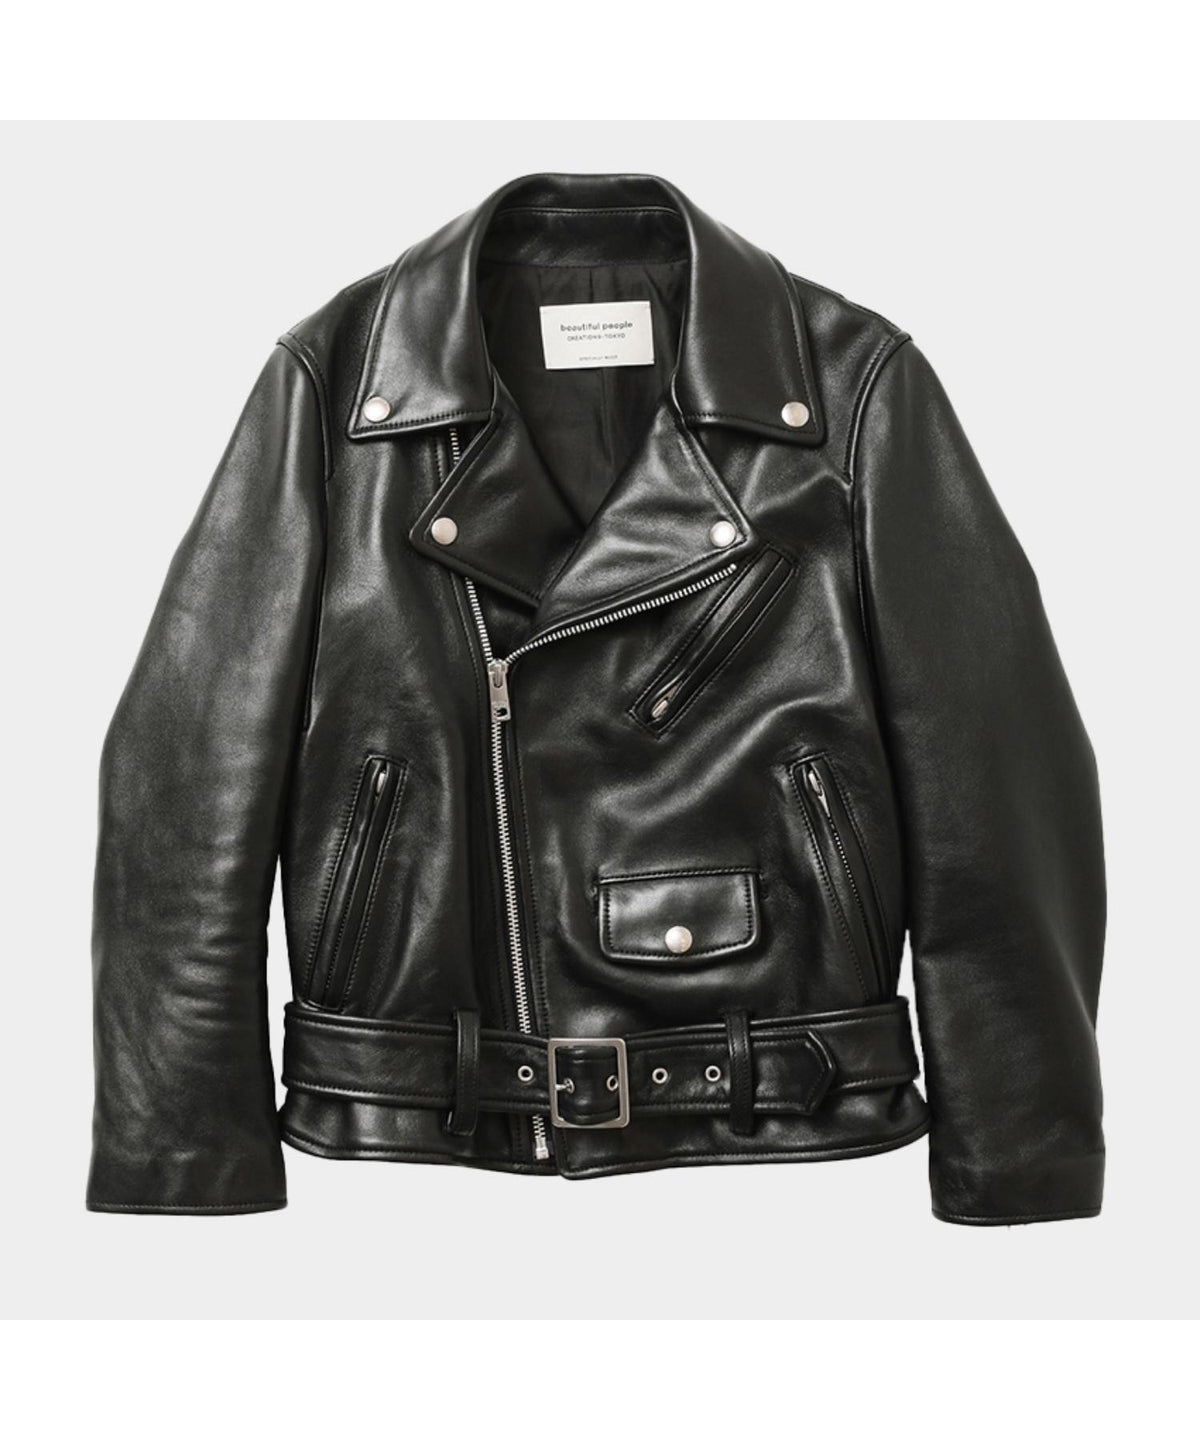 Vintage leather THE/a riders jacket